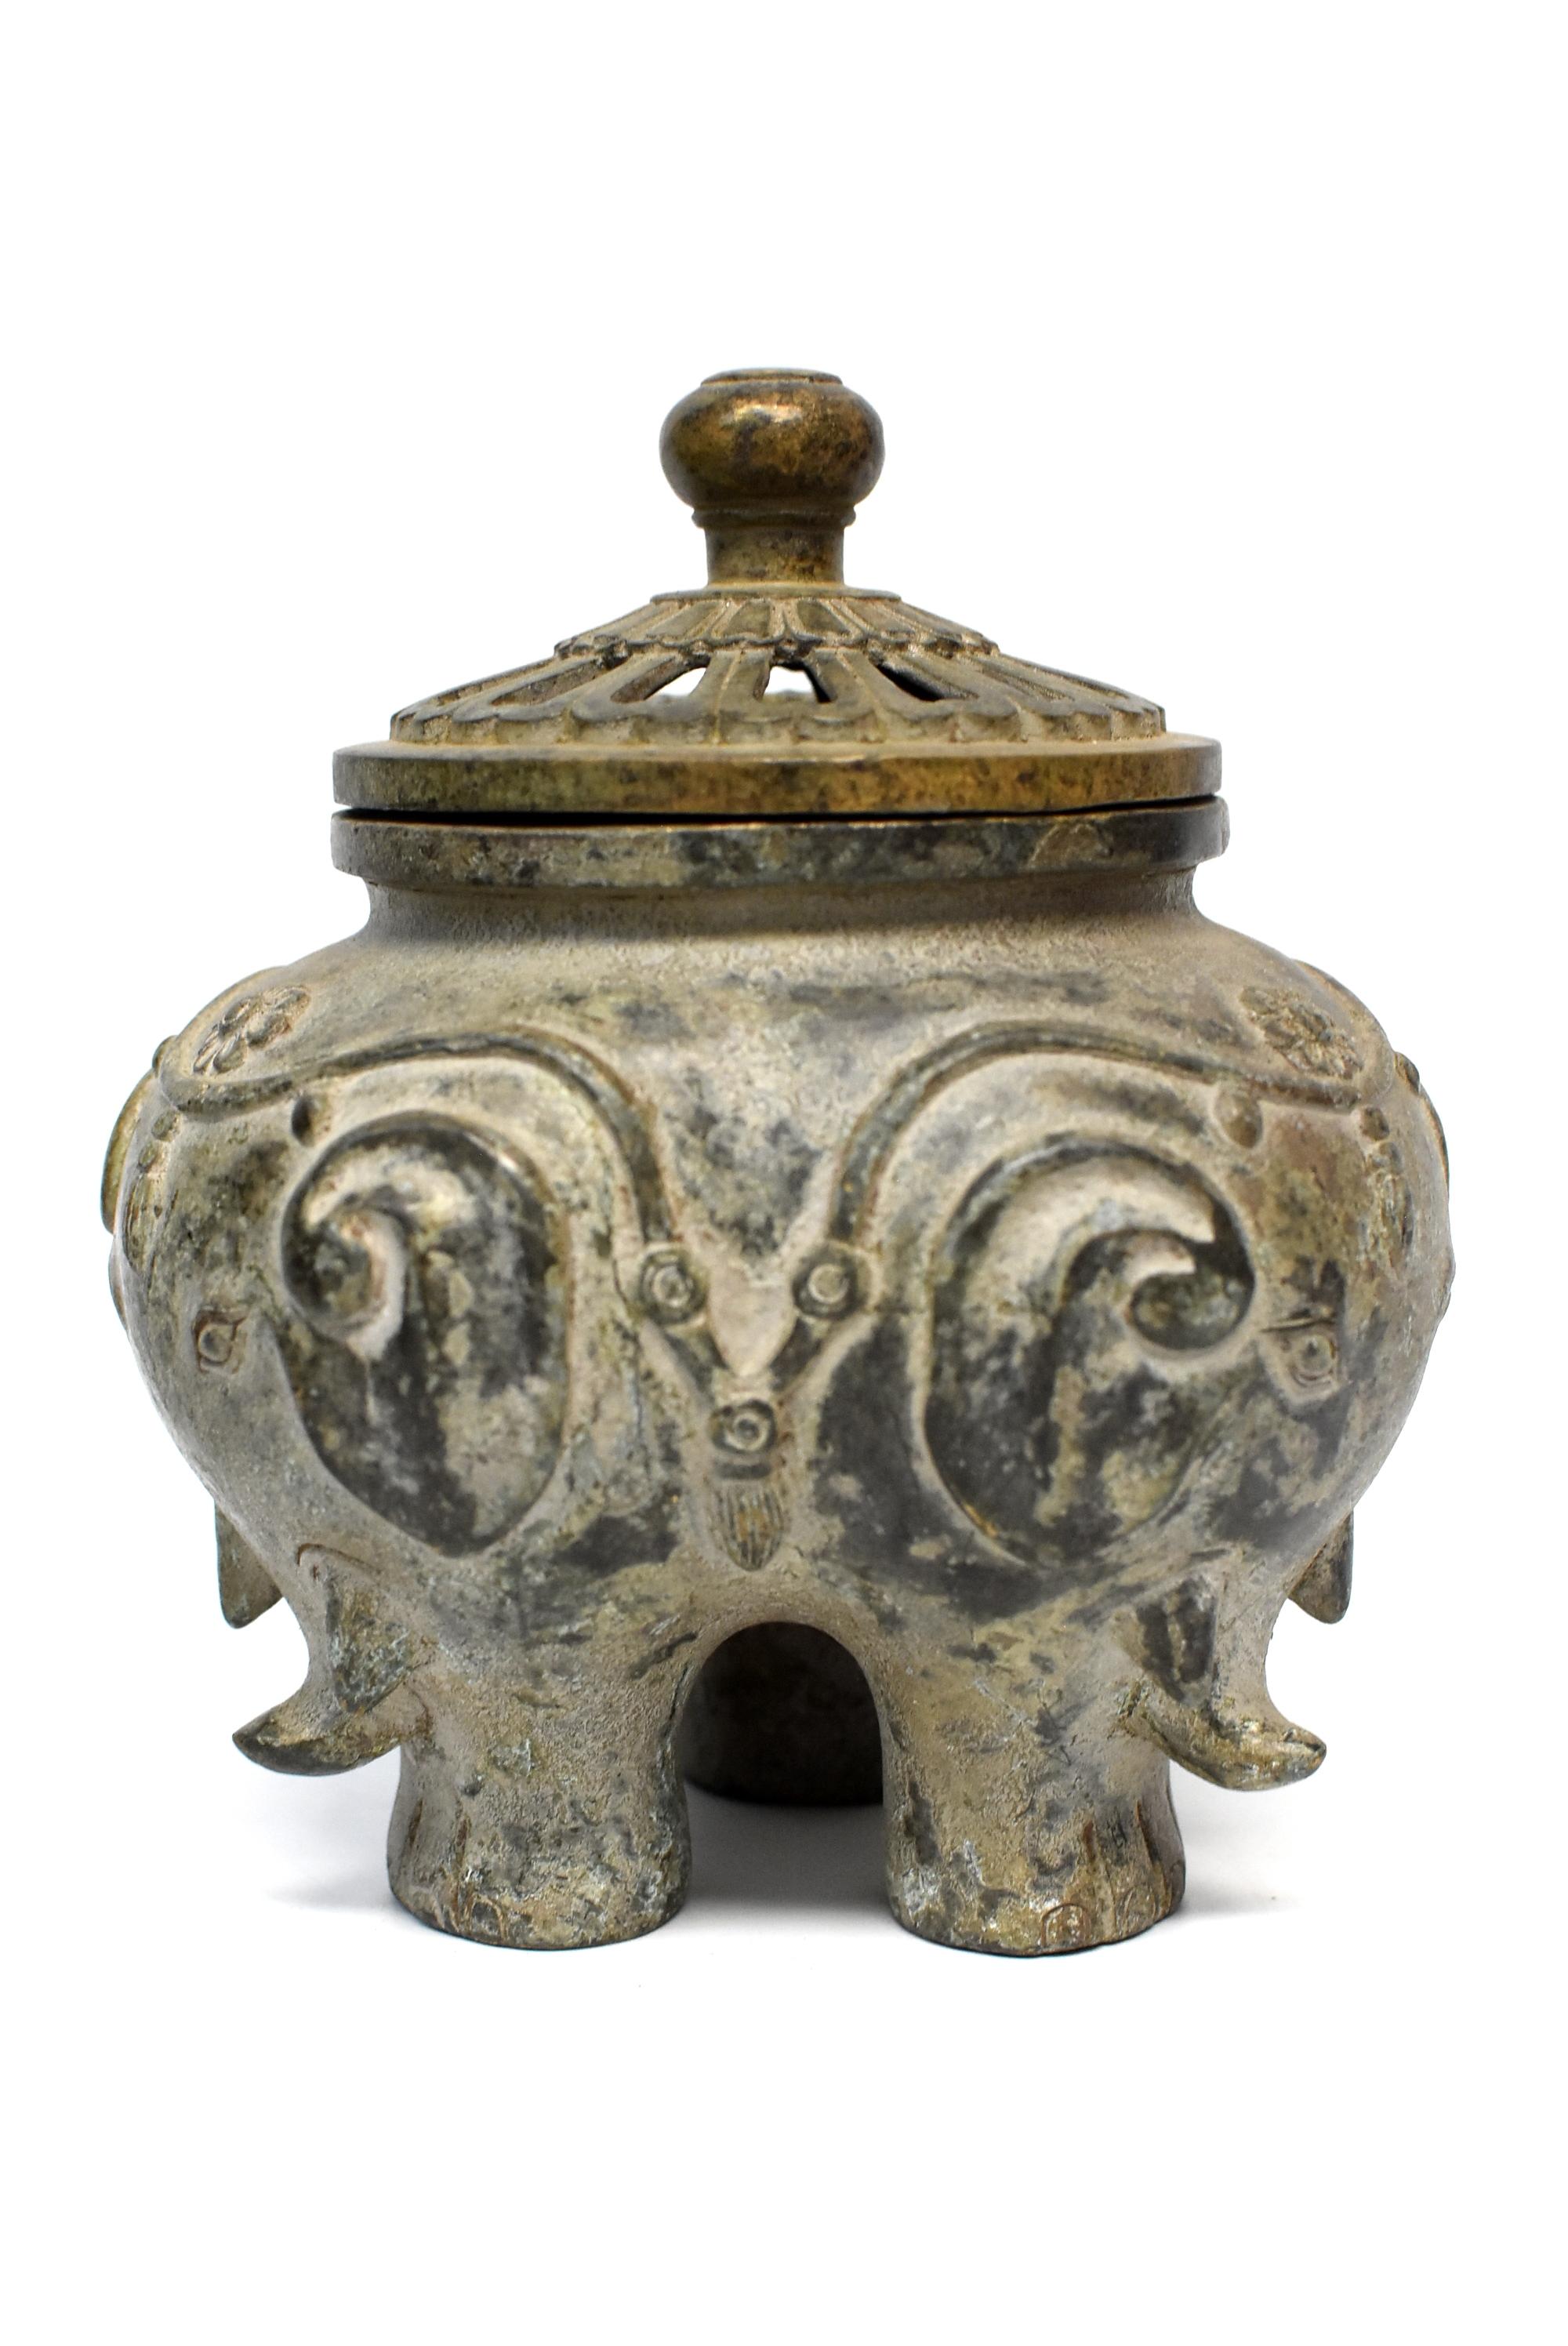 A beautiful, one of a kind, bronze incense burner featuring 3 elephants. The burner has a round lid with a Classic 